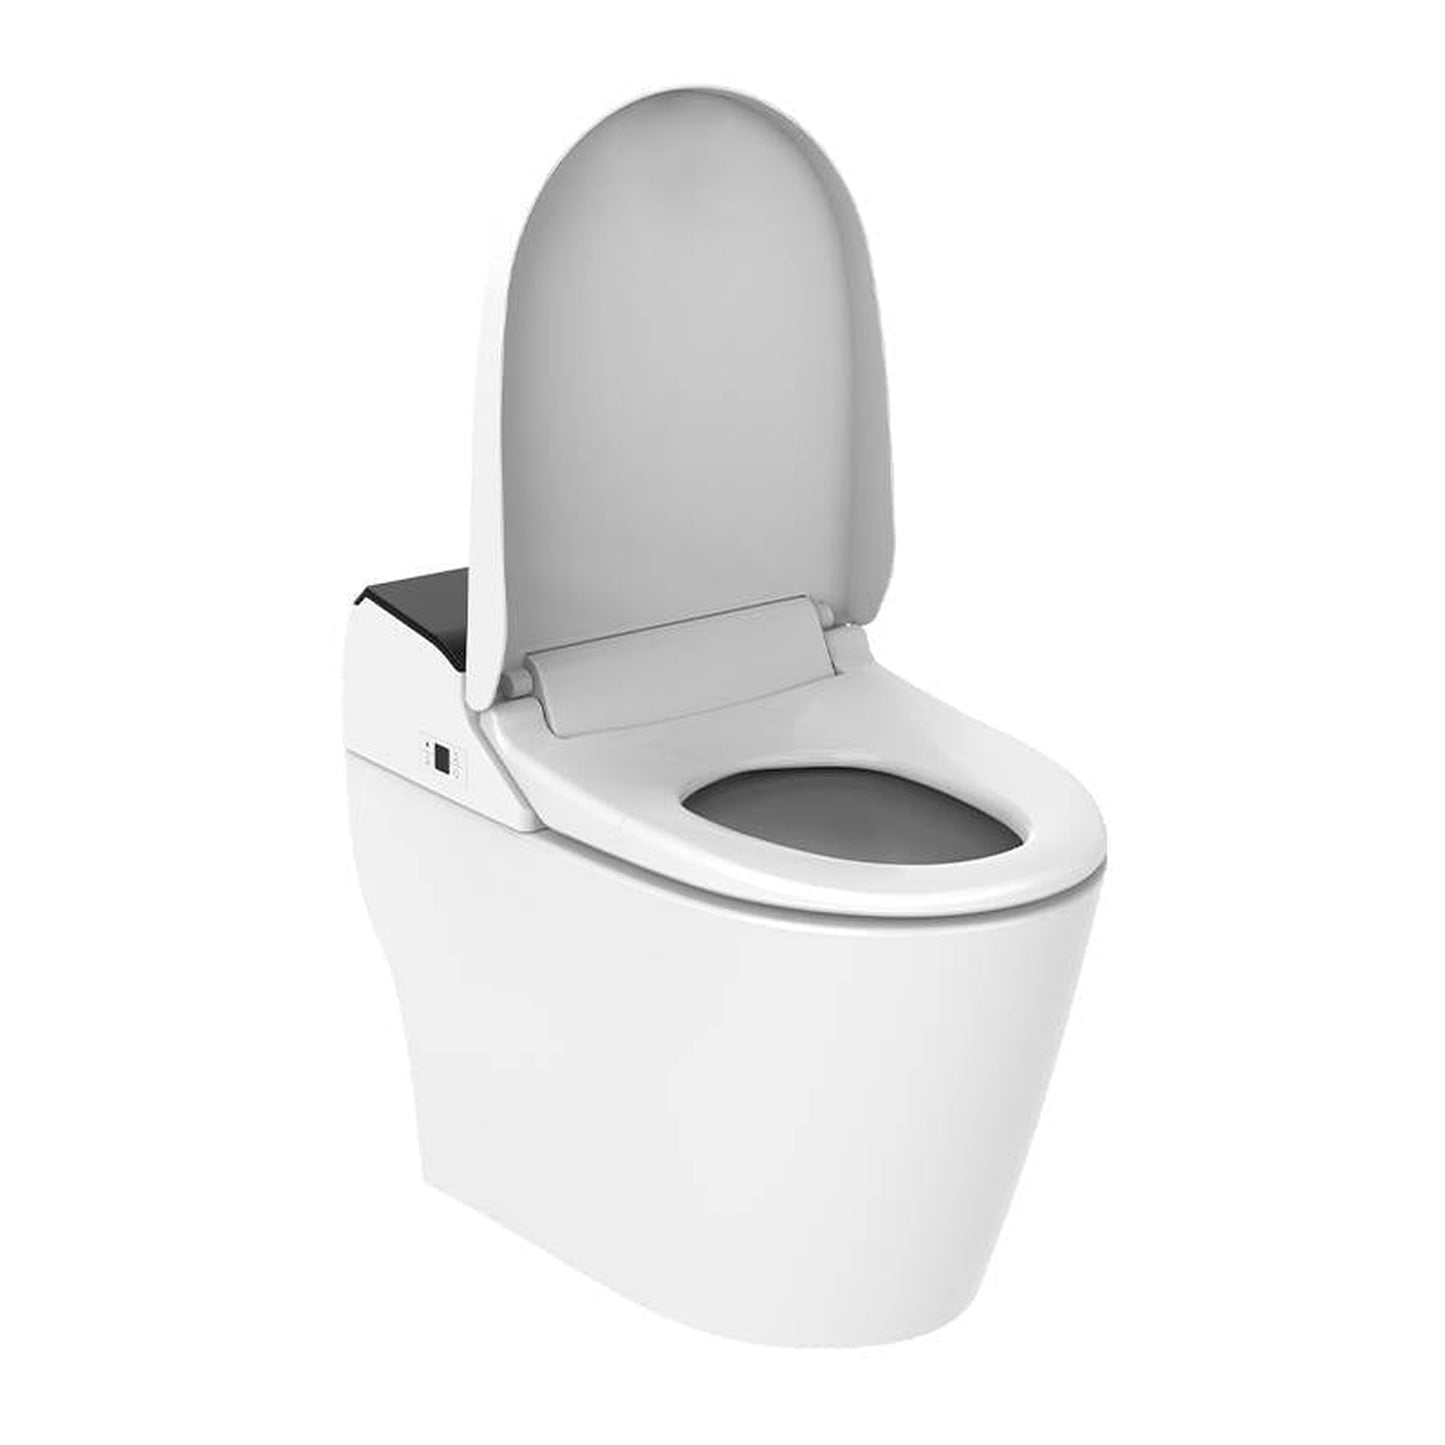 VOVO Stylement TCB 8100B Electric Integrated Smart Bidet Toilet With Remote Control